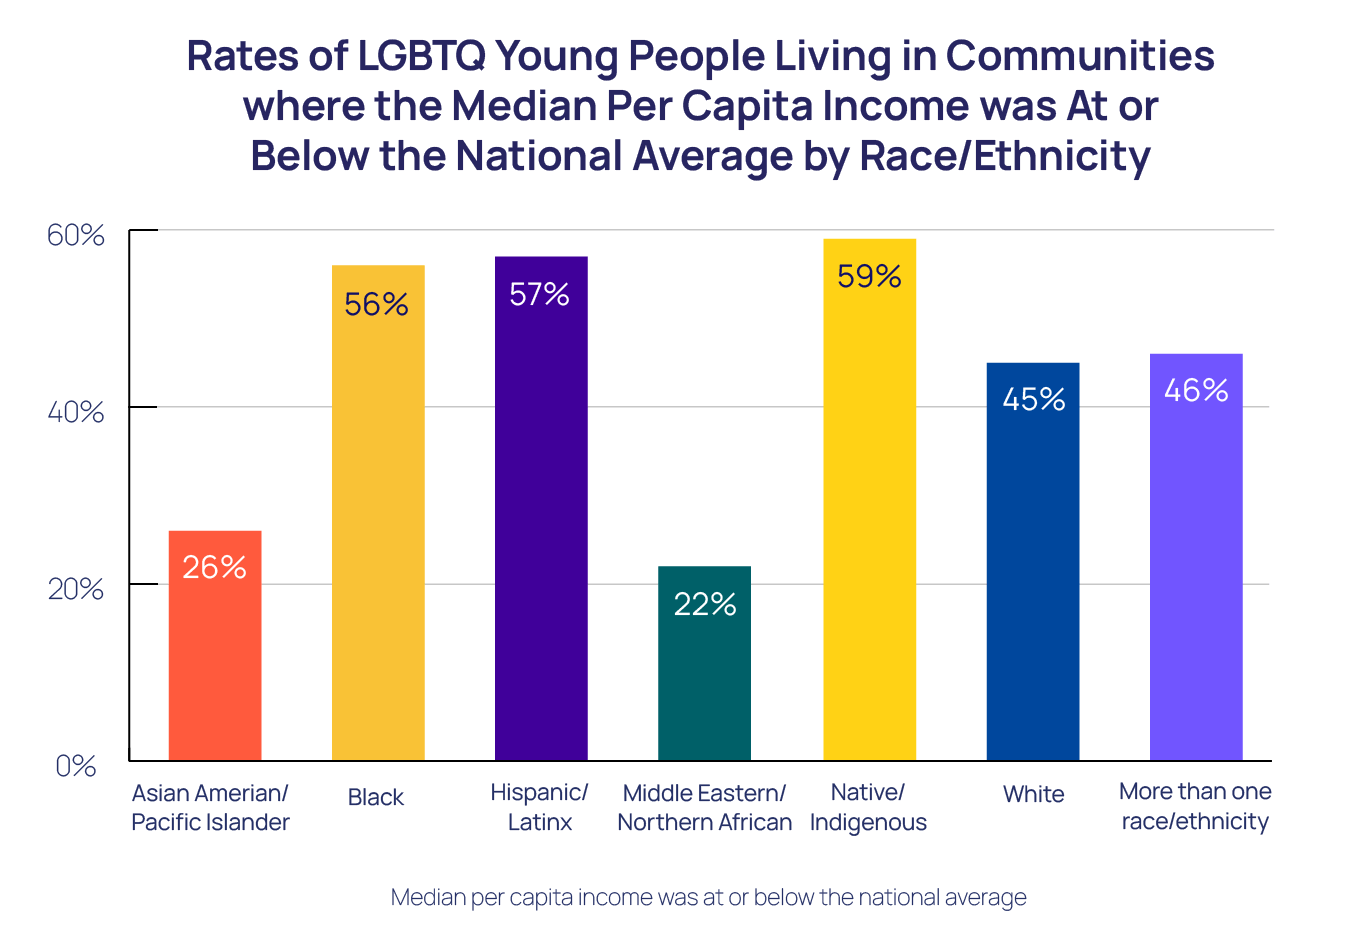 Rates of LGBTQ Young People Living in Communities where the Median Per Capita Income was At or Below the National Average by Race/Ethnicity Bar Chart